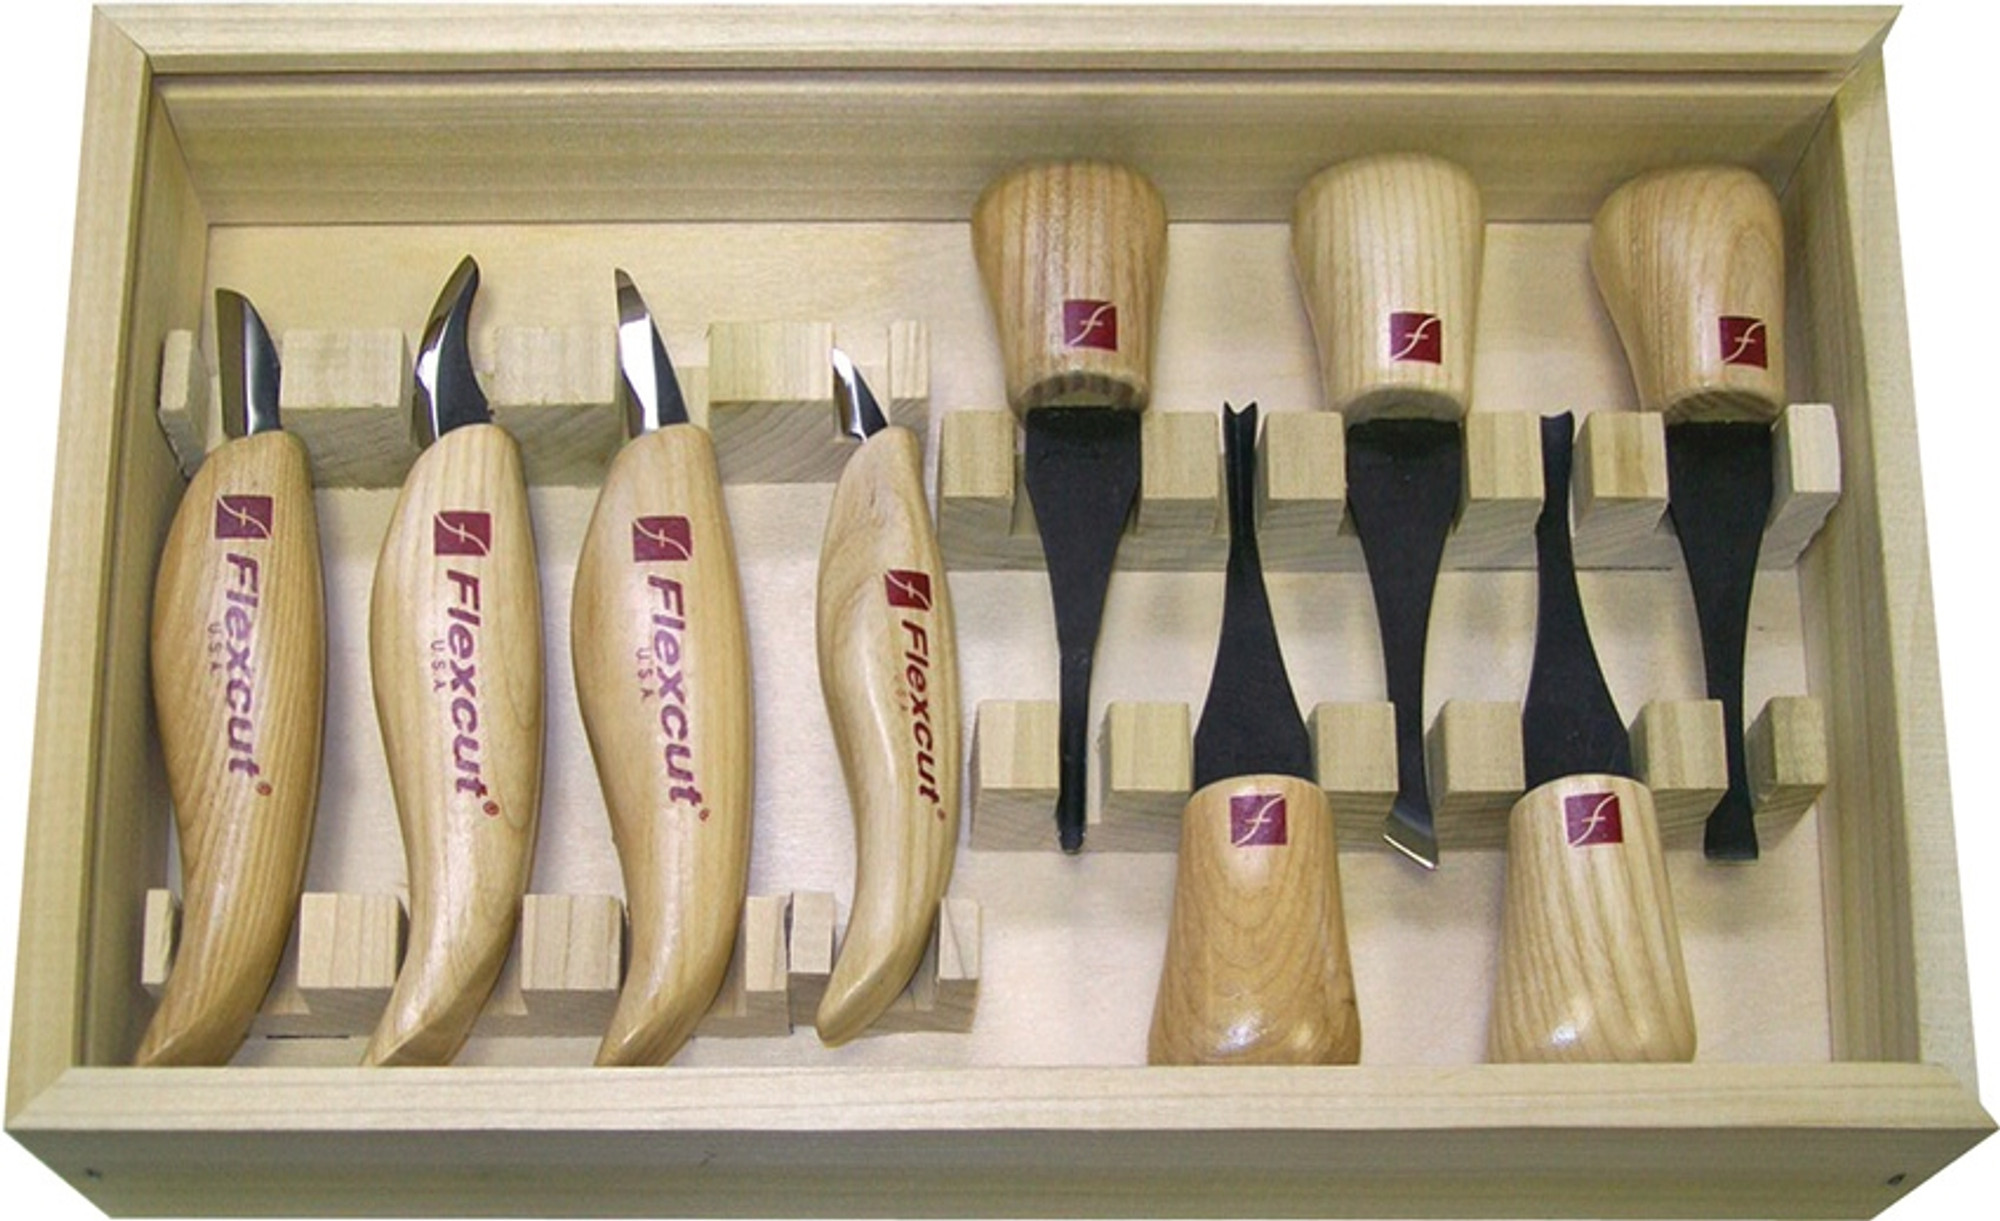 Deluxe Palm and Knife Set